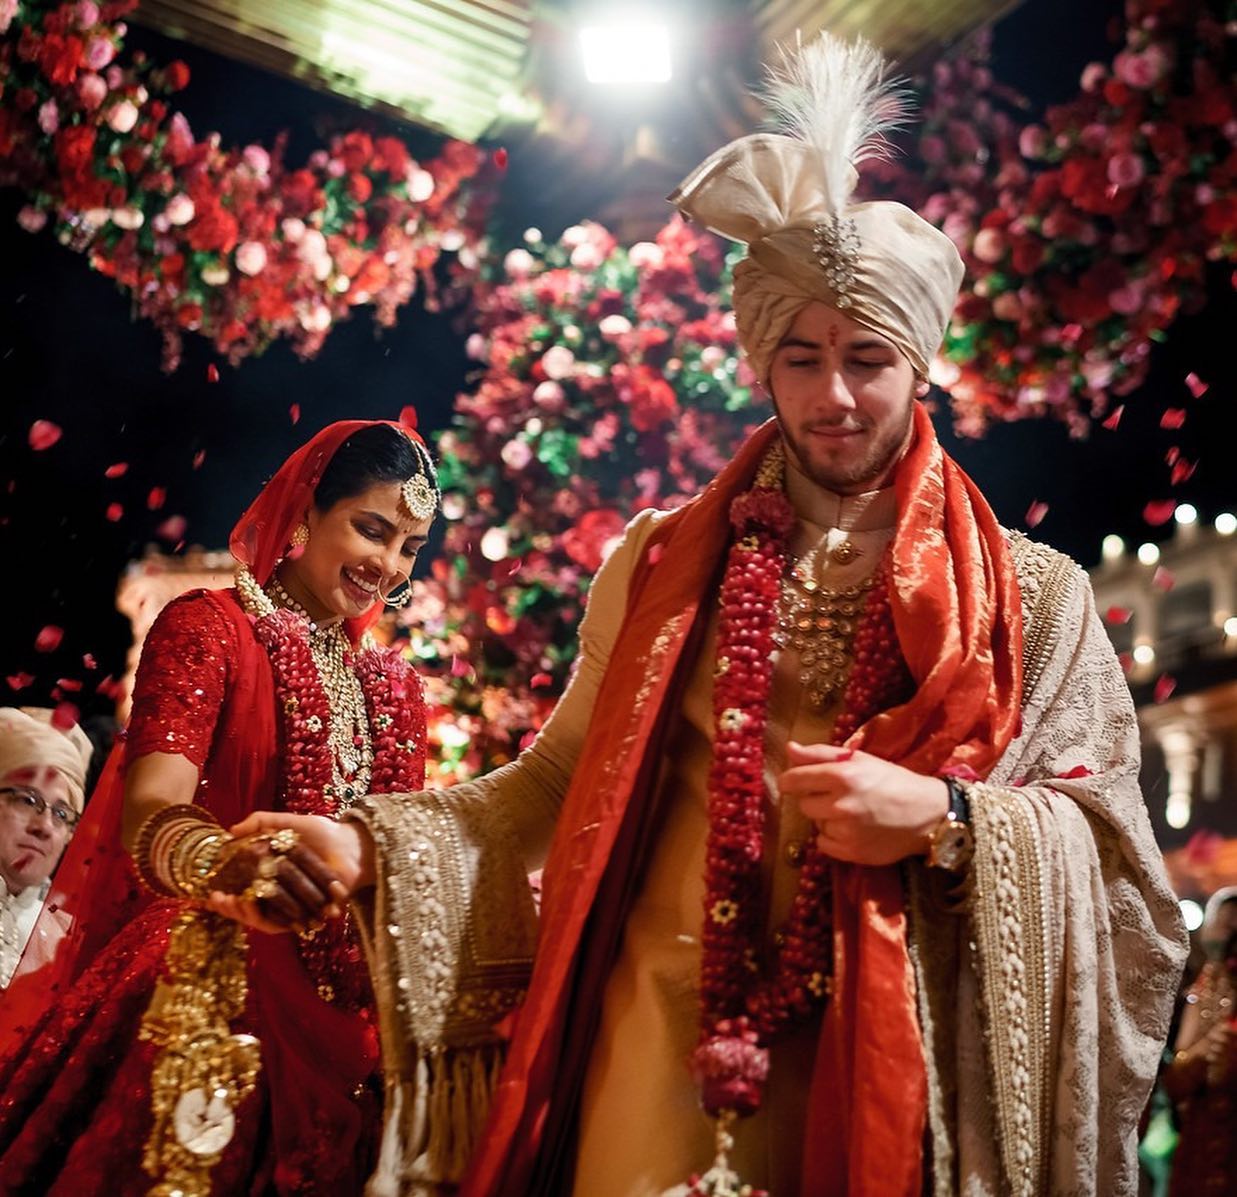 With Ranbir Kapoor-Alia Bhatt's Marriage Reports Doing Rounds, Here Are 5 Other Celebrity Weddings That Became The Talk Of B-Town